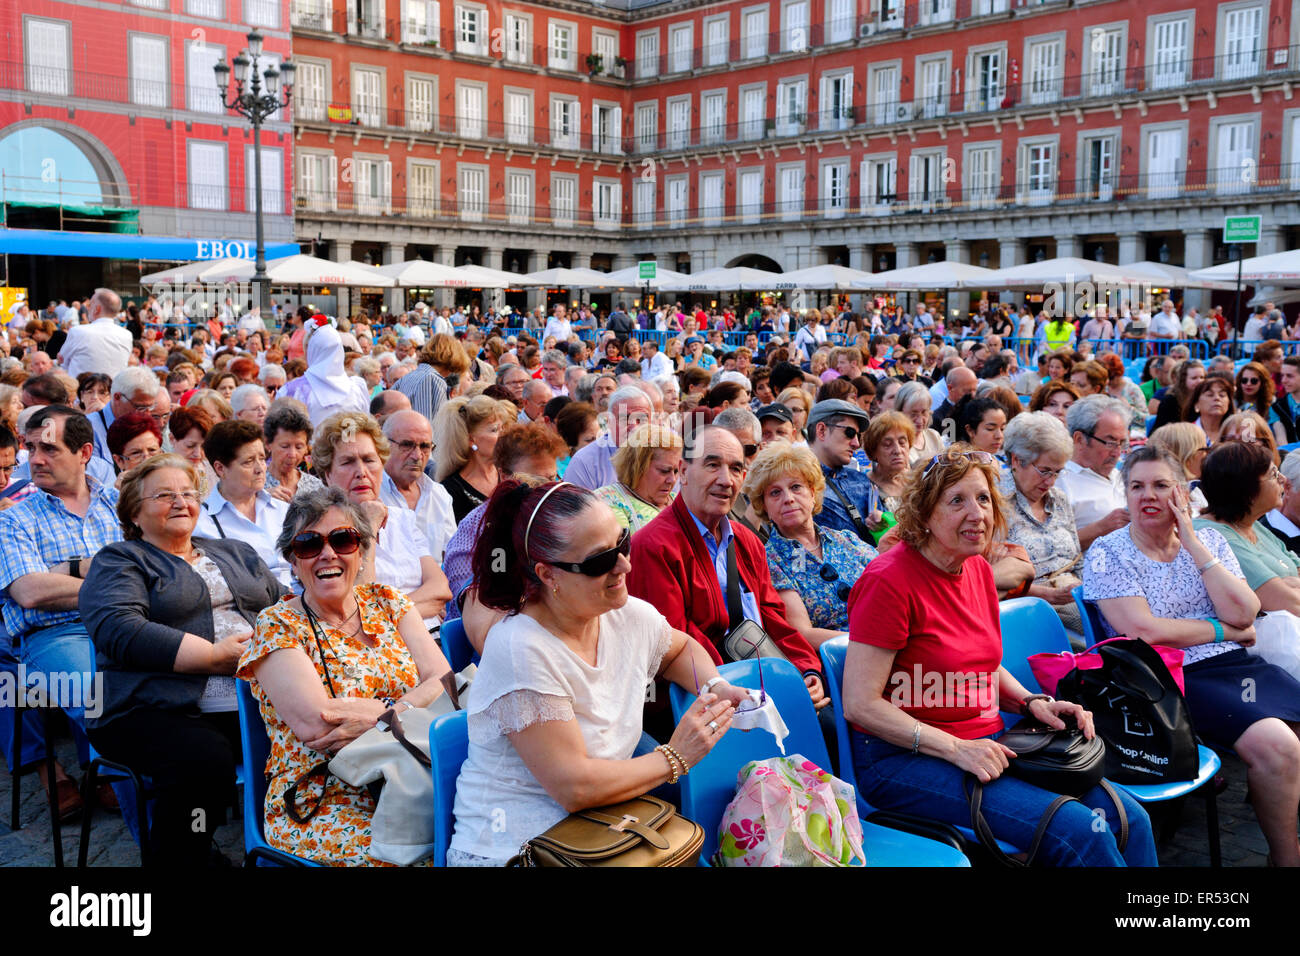 Large crowd seated in Plaza Mayor, Madrid, Spain Stock Photo